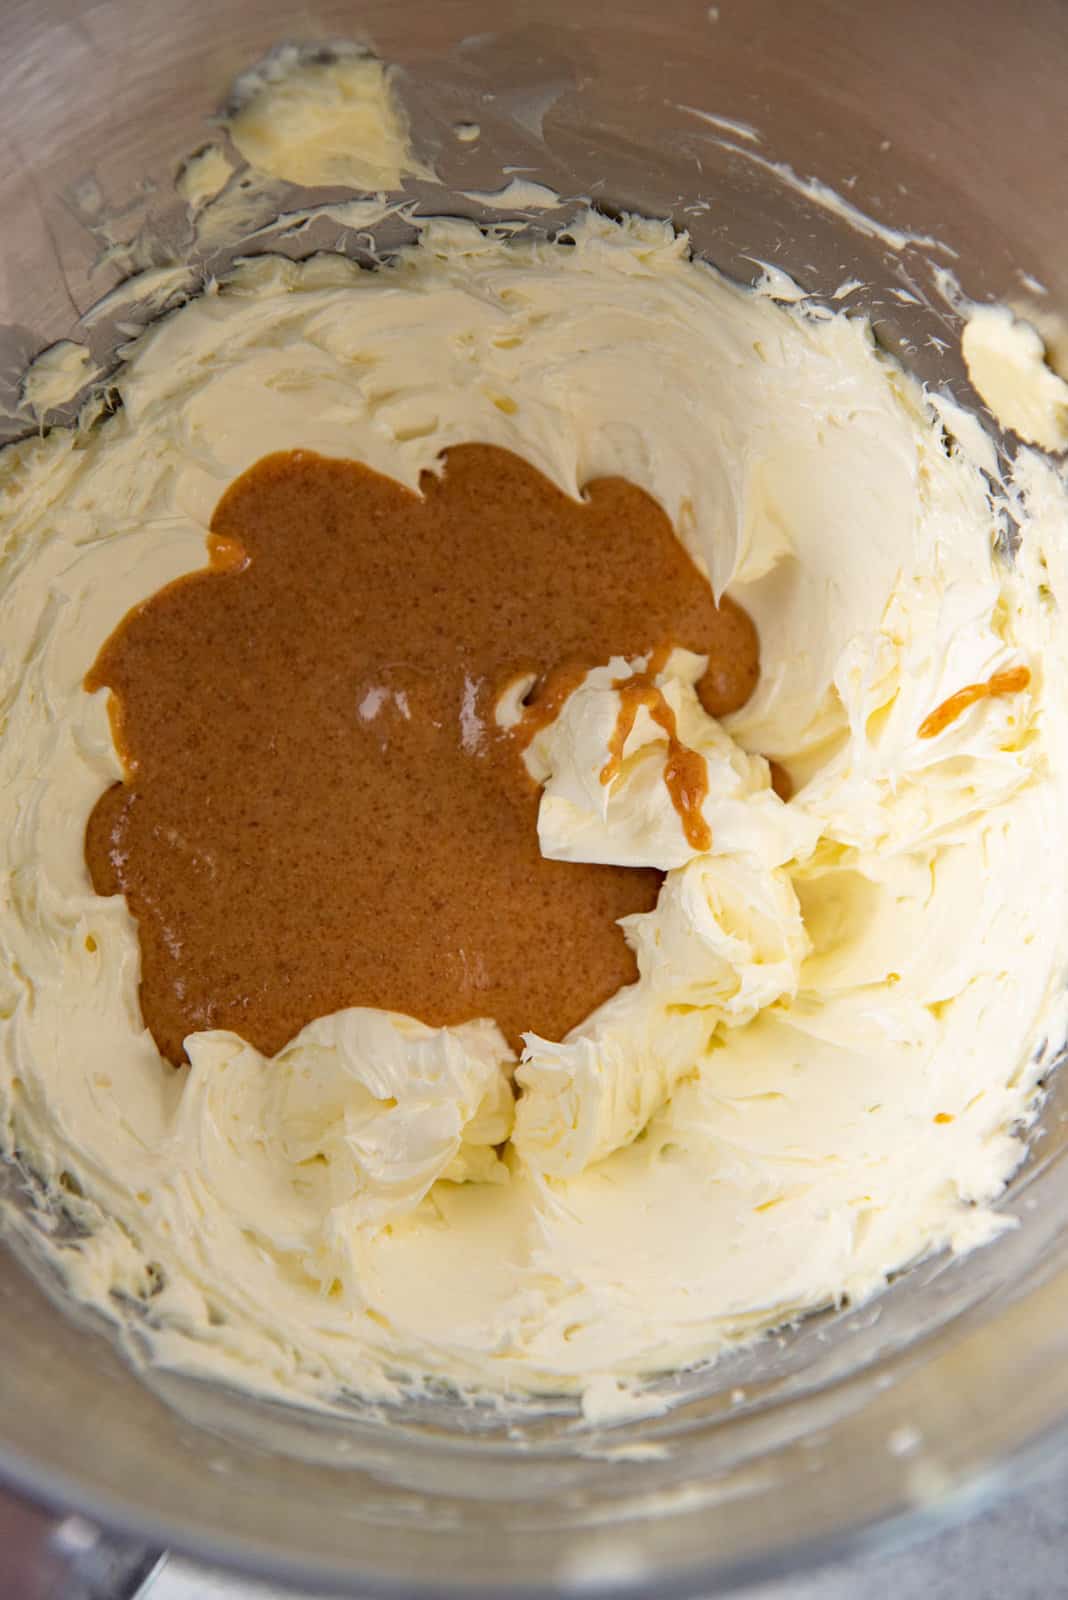 Praline paste added to the butter mixture.